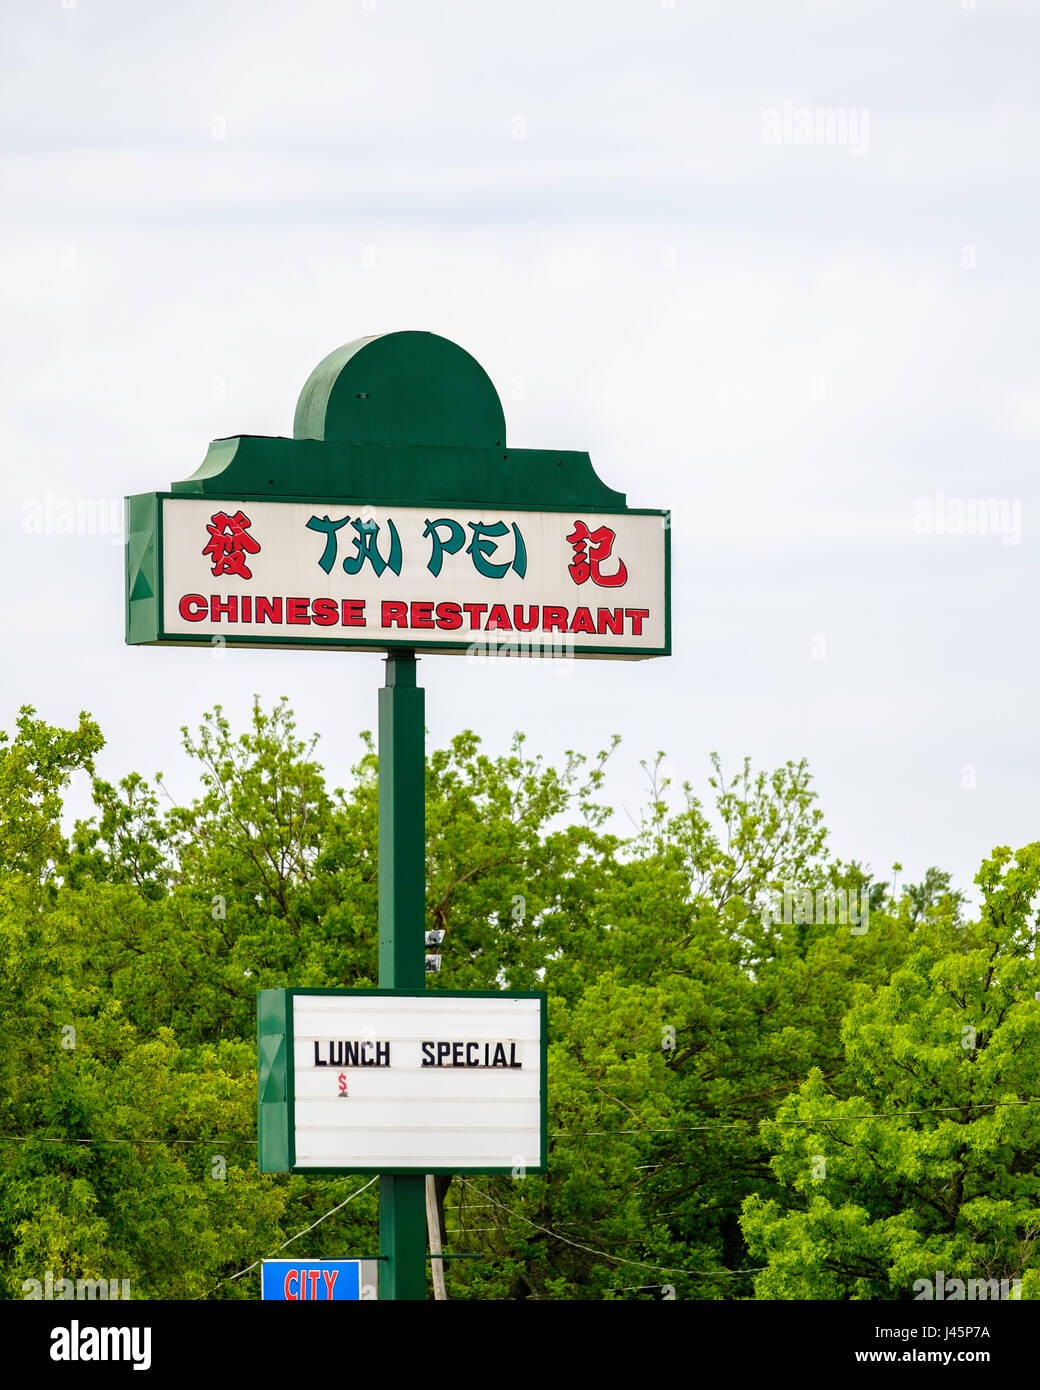 A pole sign advertising Tai Pei, a Chinese restaurant located on north McArthur Blvd. in Oklahoma City, Oklahoma, USA. Stock Photo